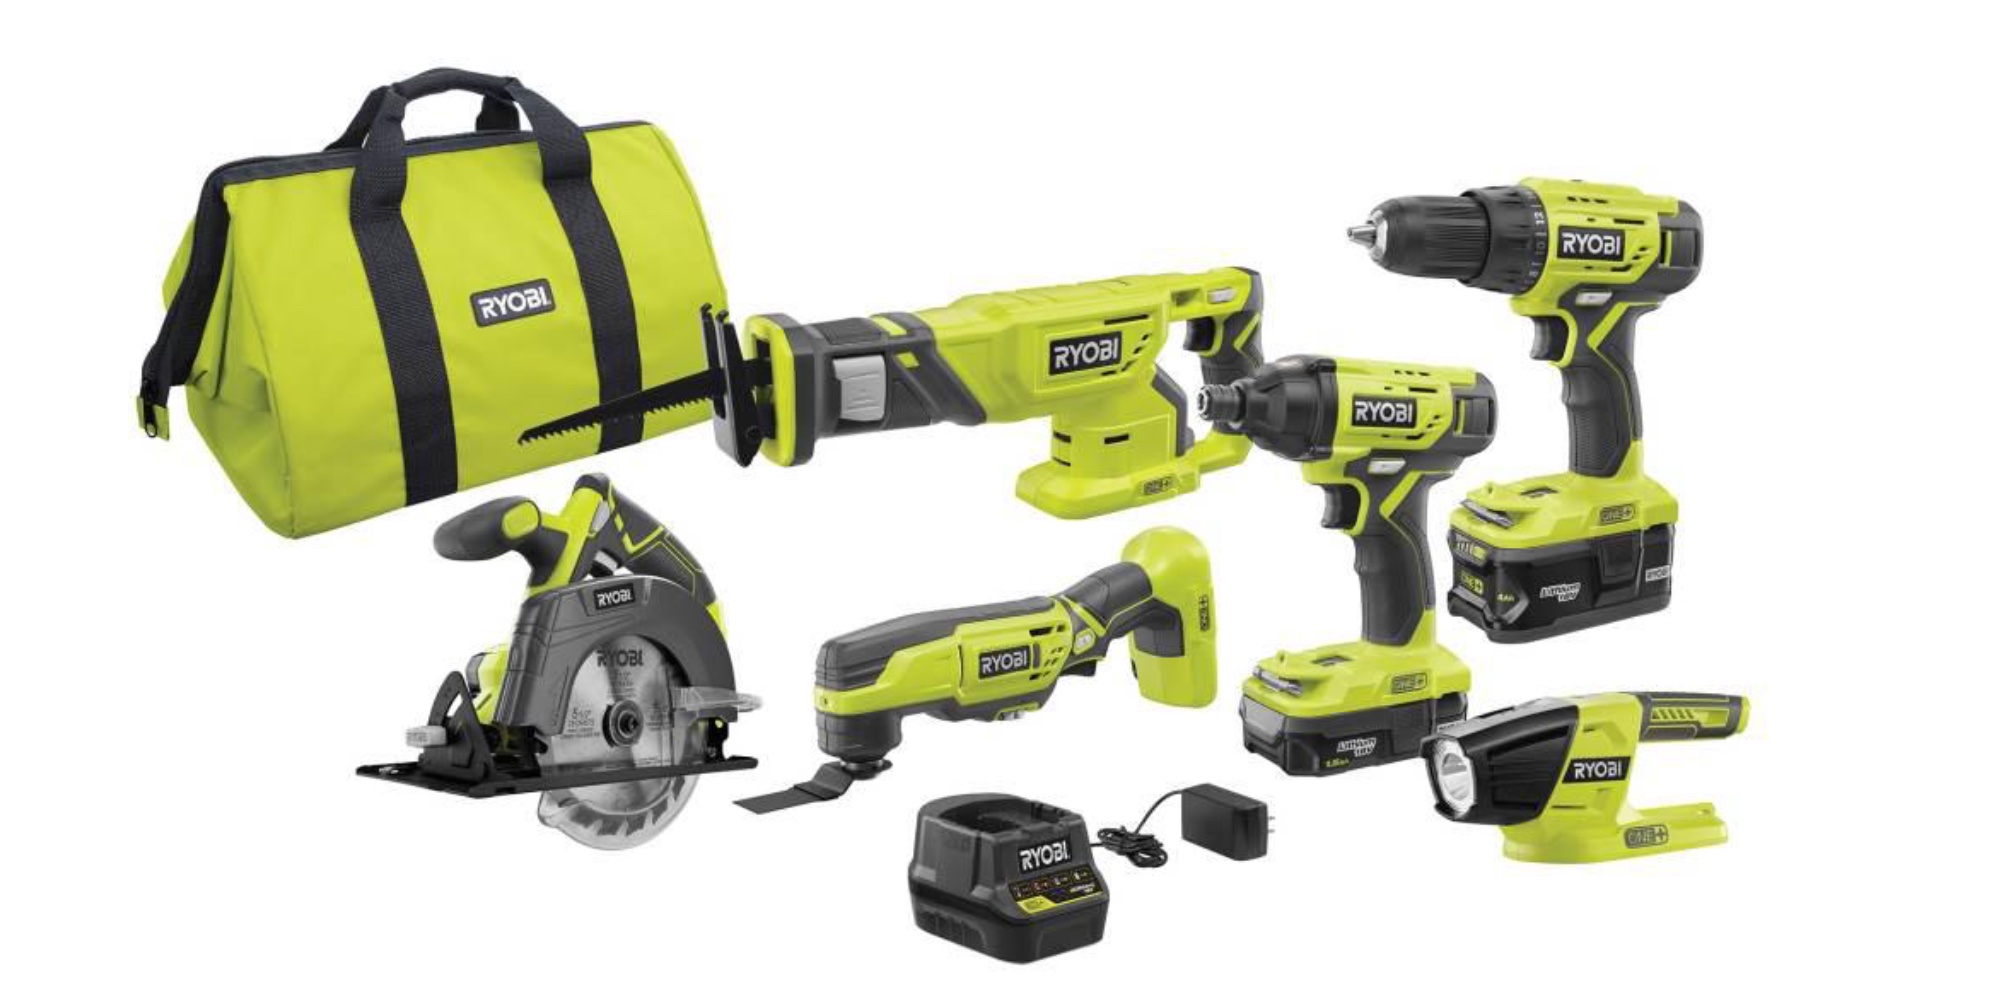 Home Depot continues the Black deals with to $150 off RYOBI combo kits